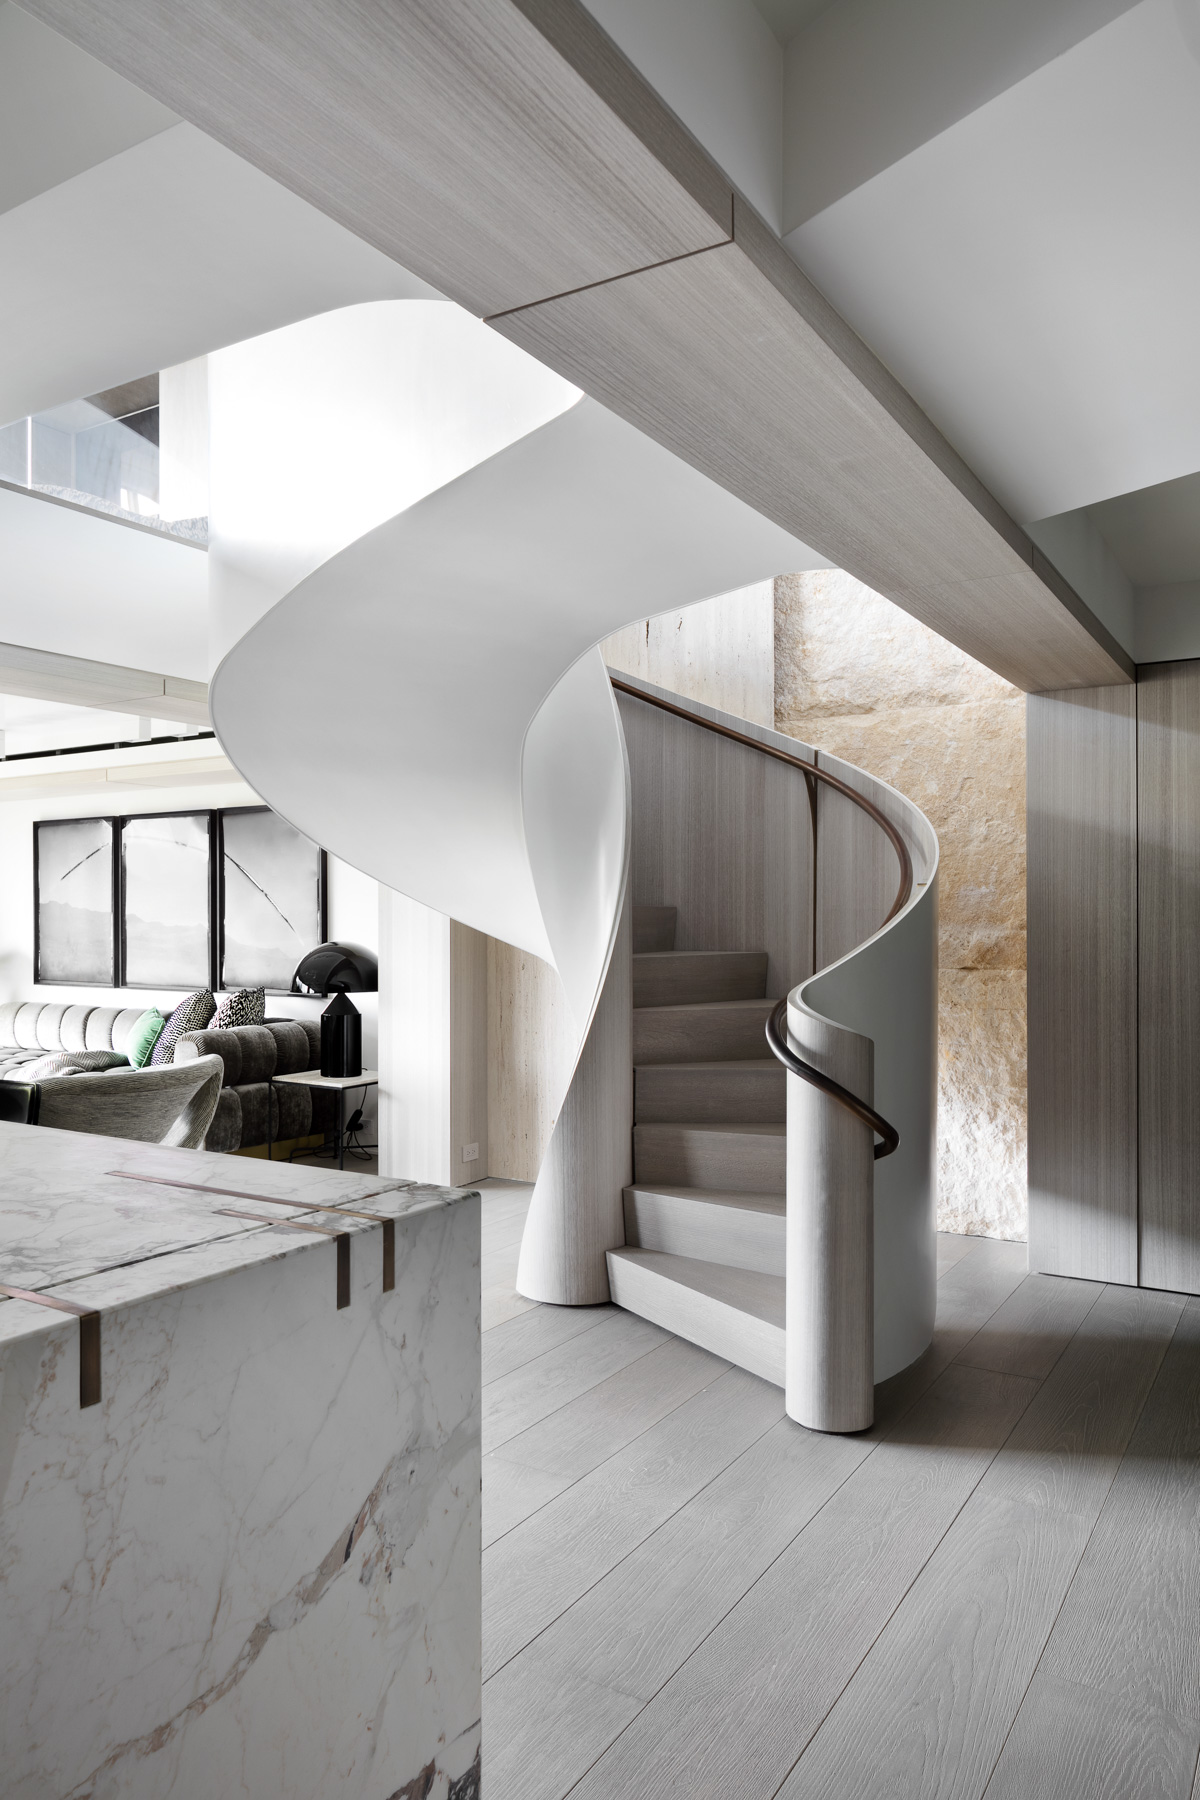 Elegant curved staircase inside high-end residential duplex